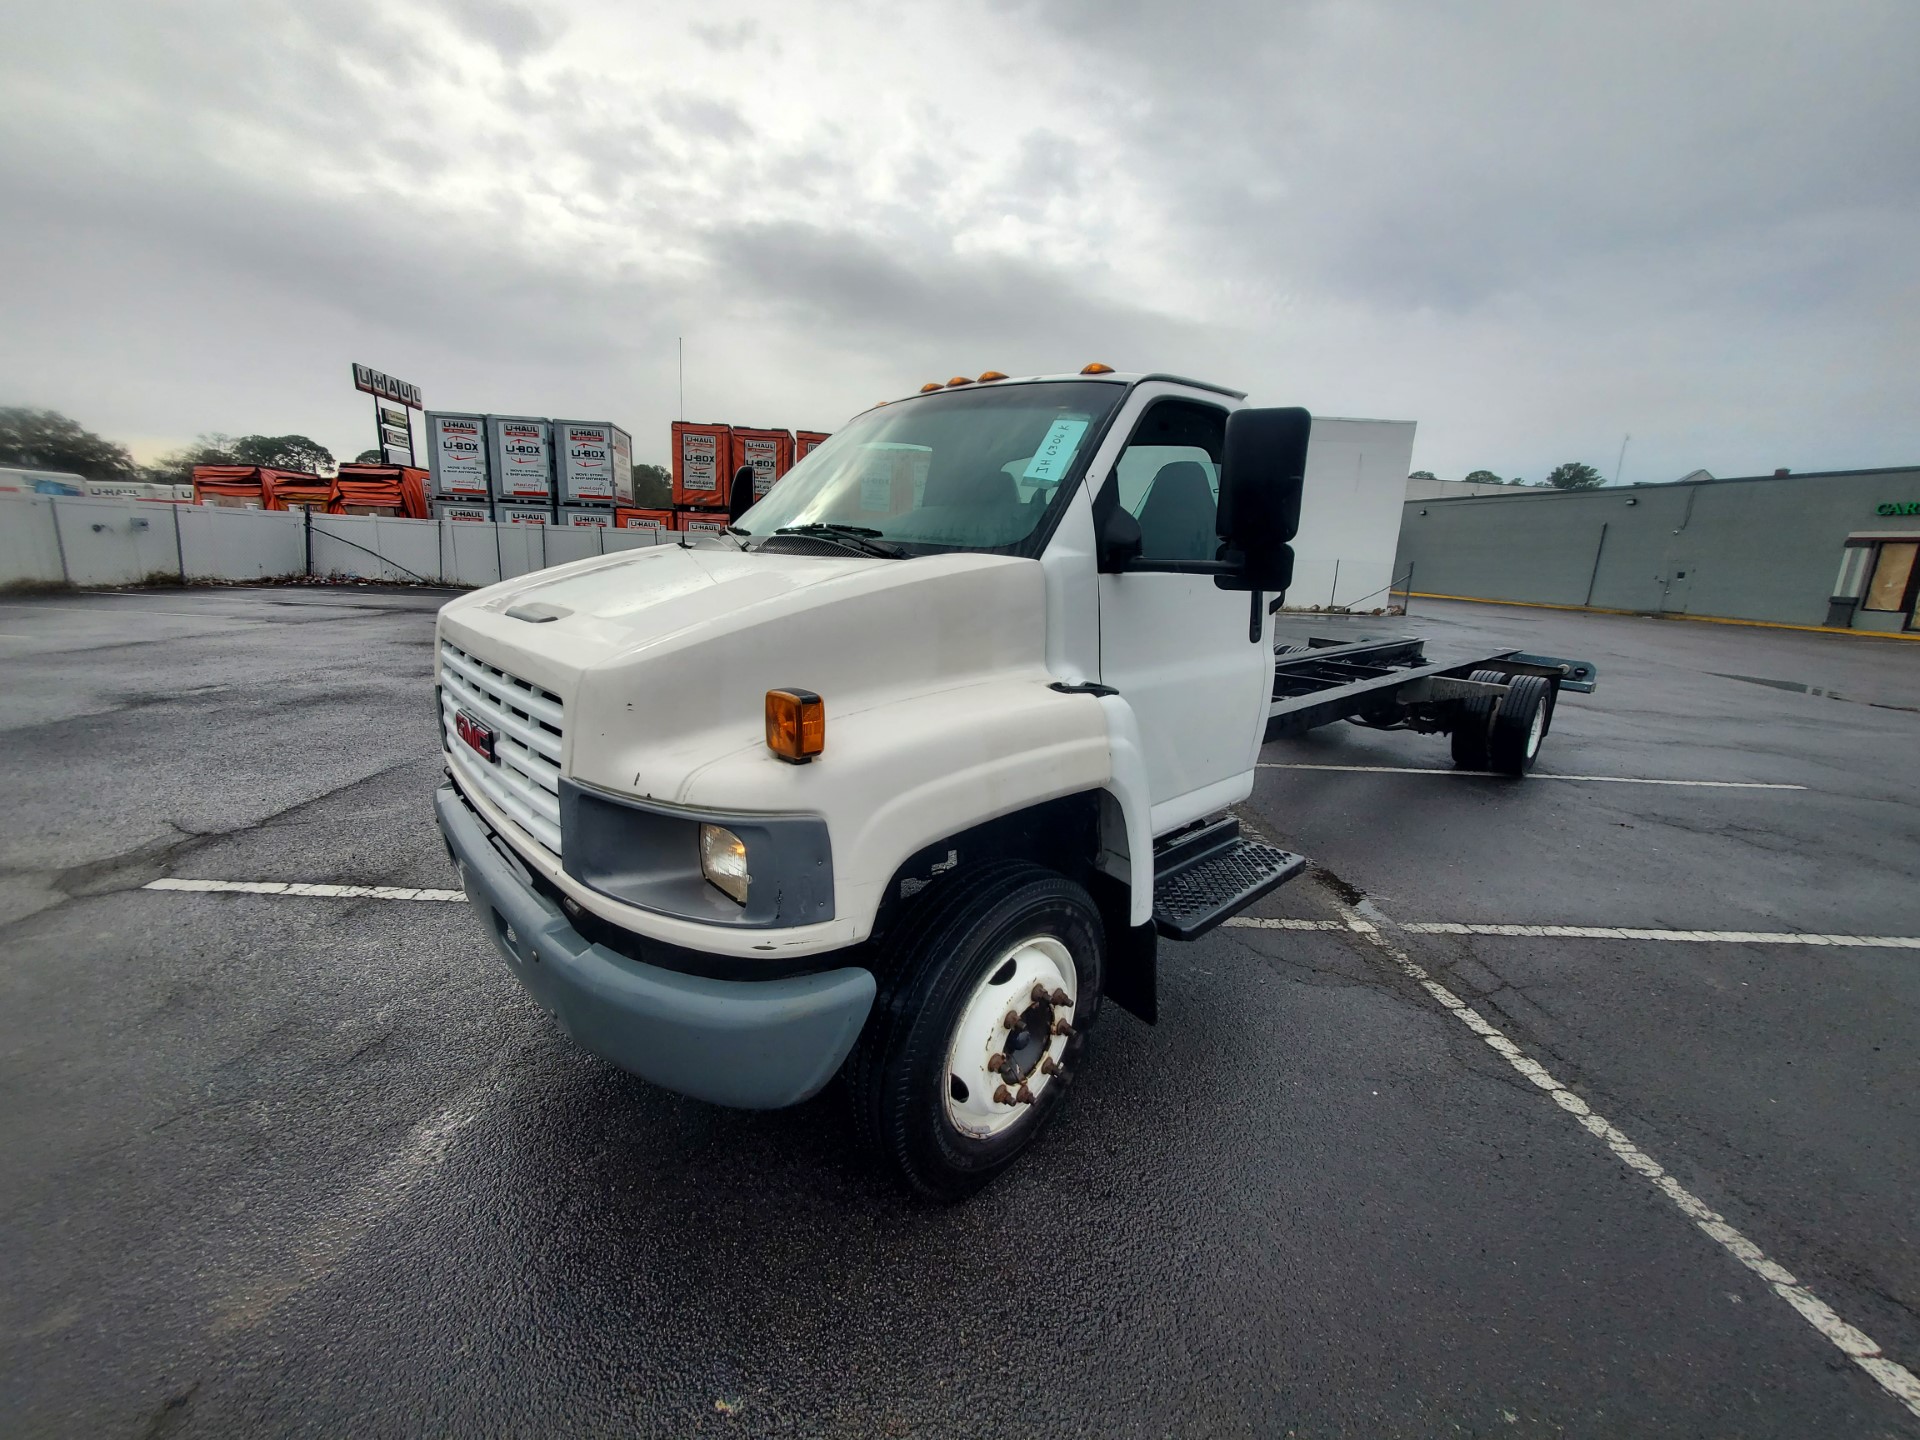 Used 2005 26 ' Cab and Chassis for sale